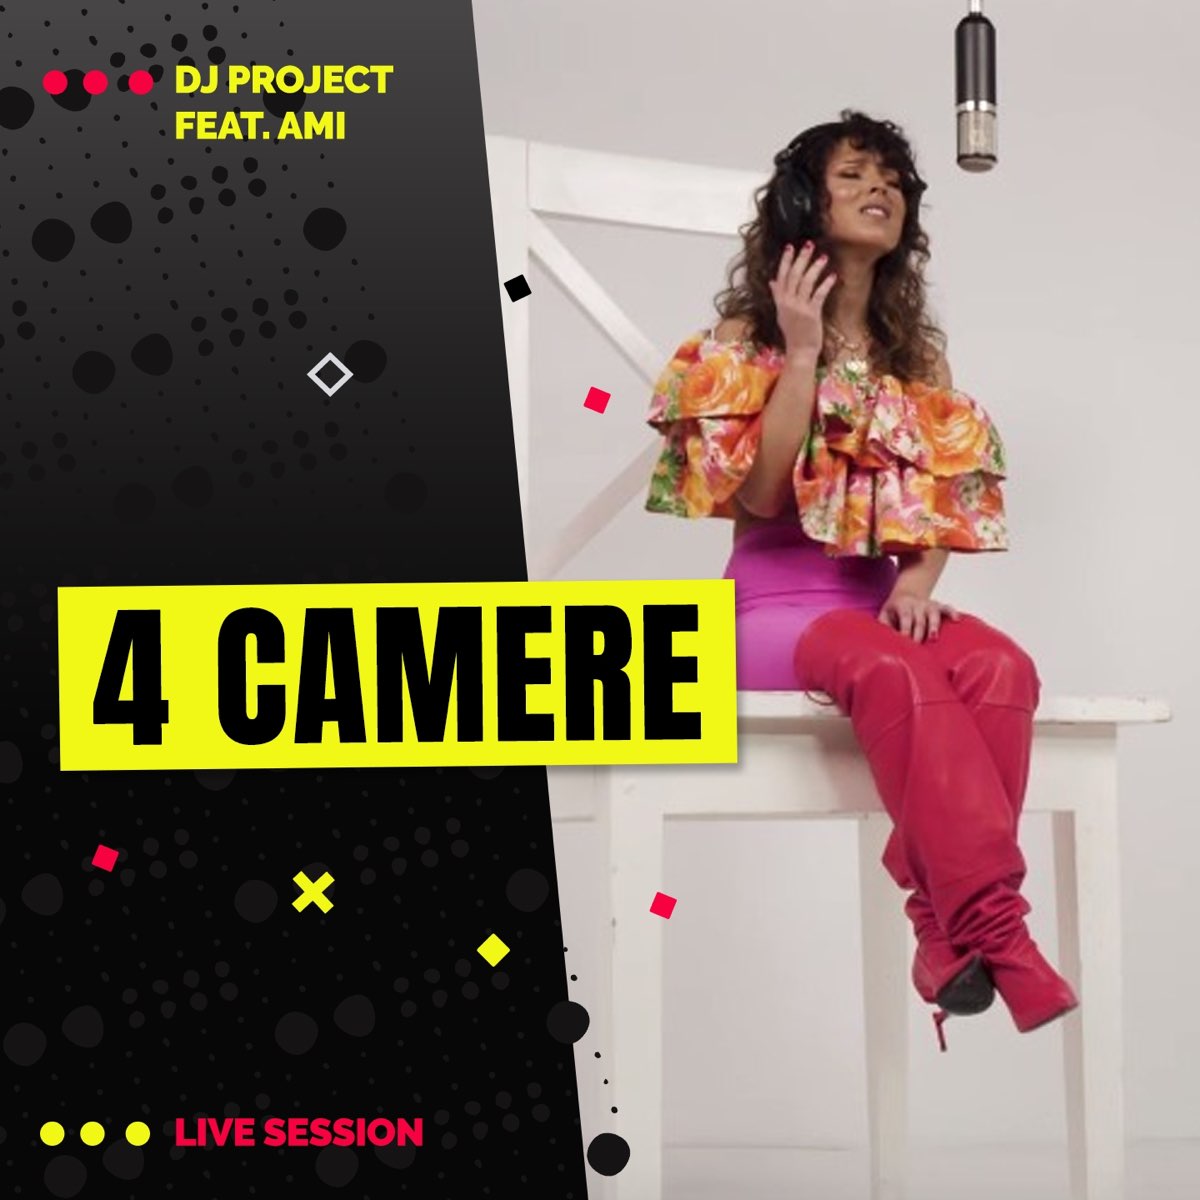 4 Camere (feat. AMI) [Live] - Single - Album by DJ Project - Apple Music